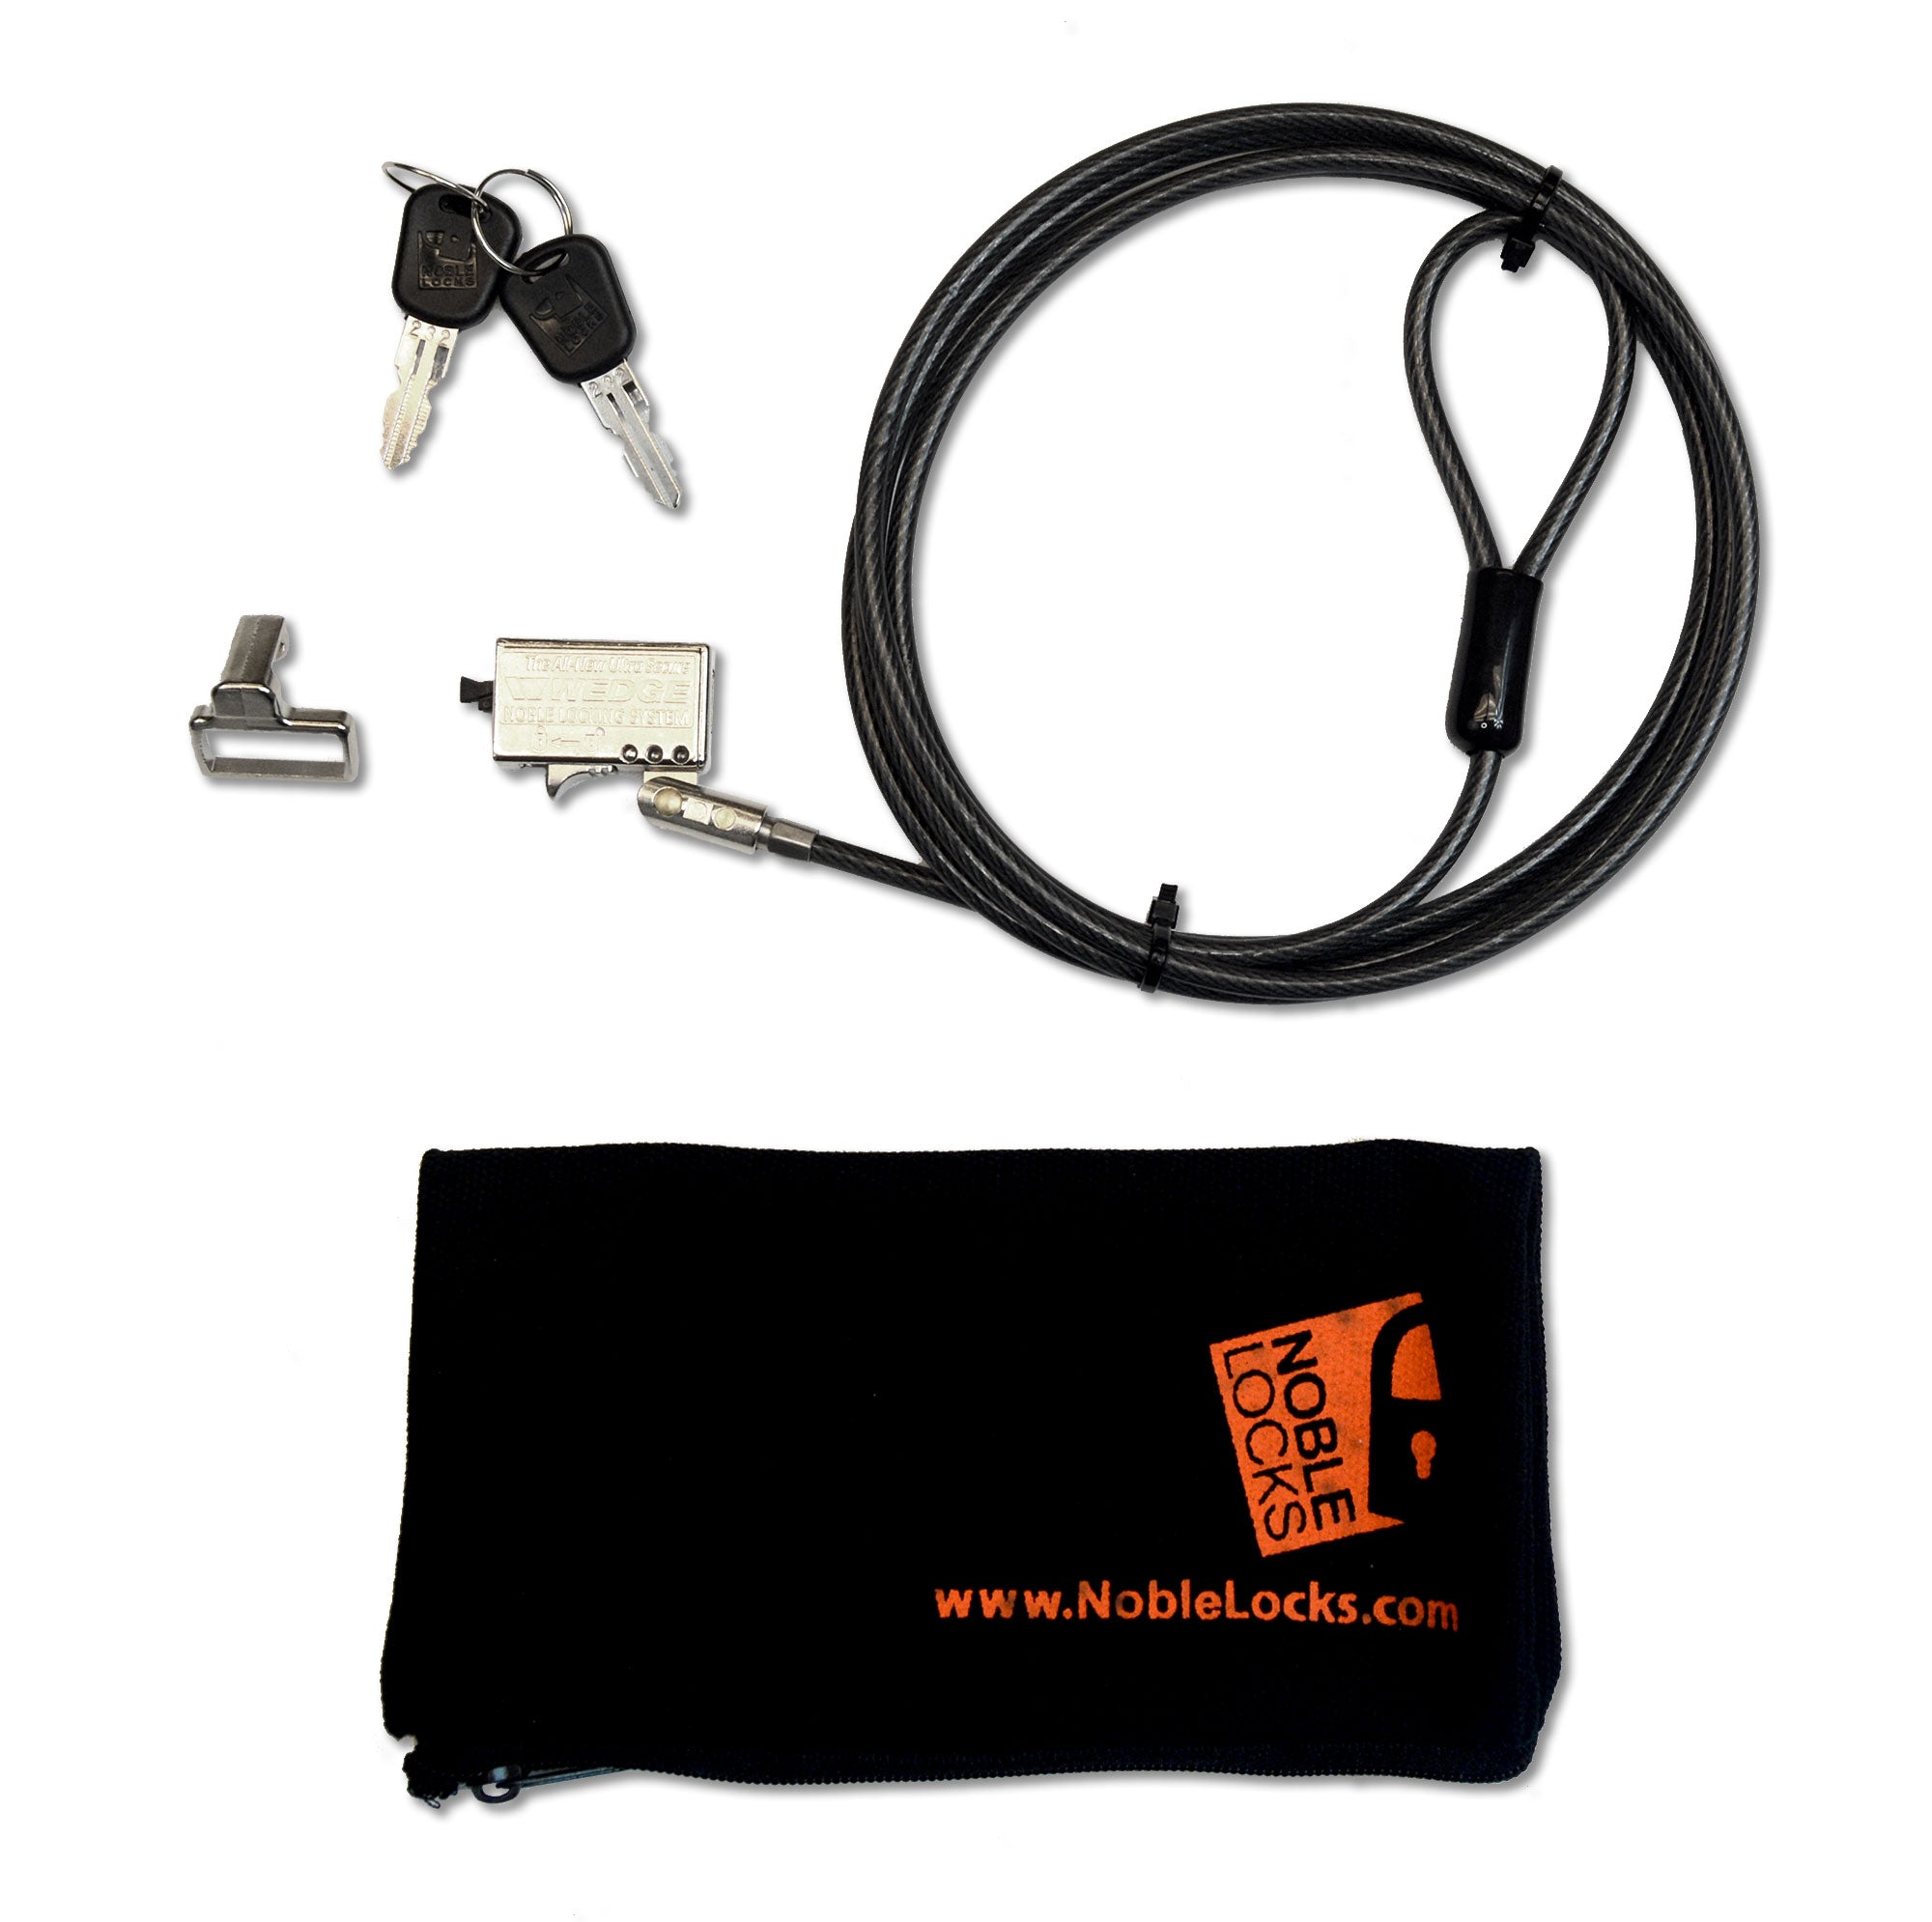 New Anti Thief Security Cable Wedge Laptop Lock With Key For Dell